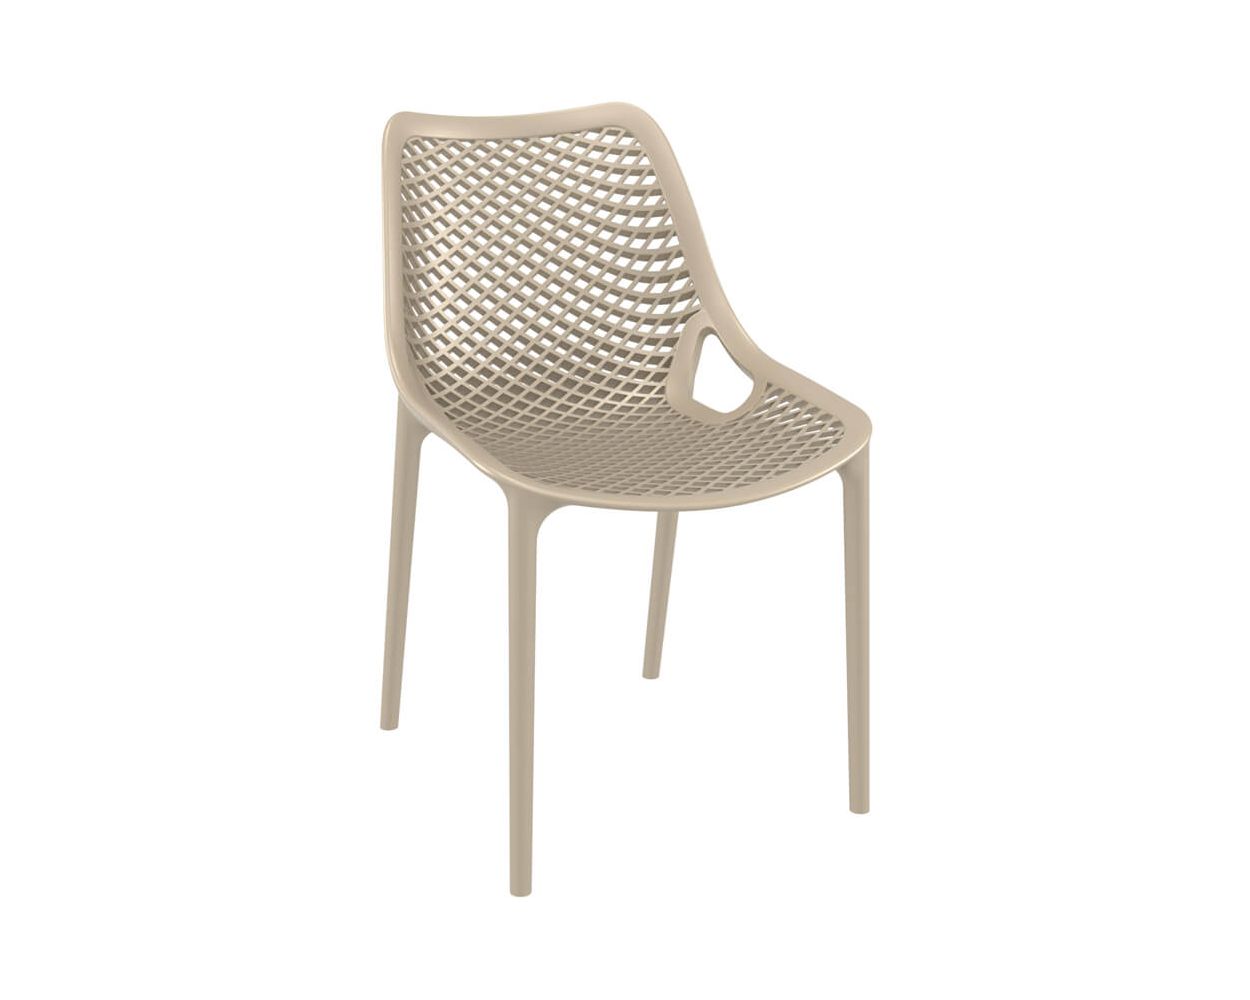 FIBRE GLASS CHAIR MODEL 7874 BEIGE TAUPE